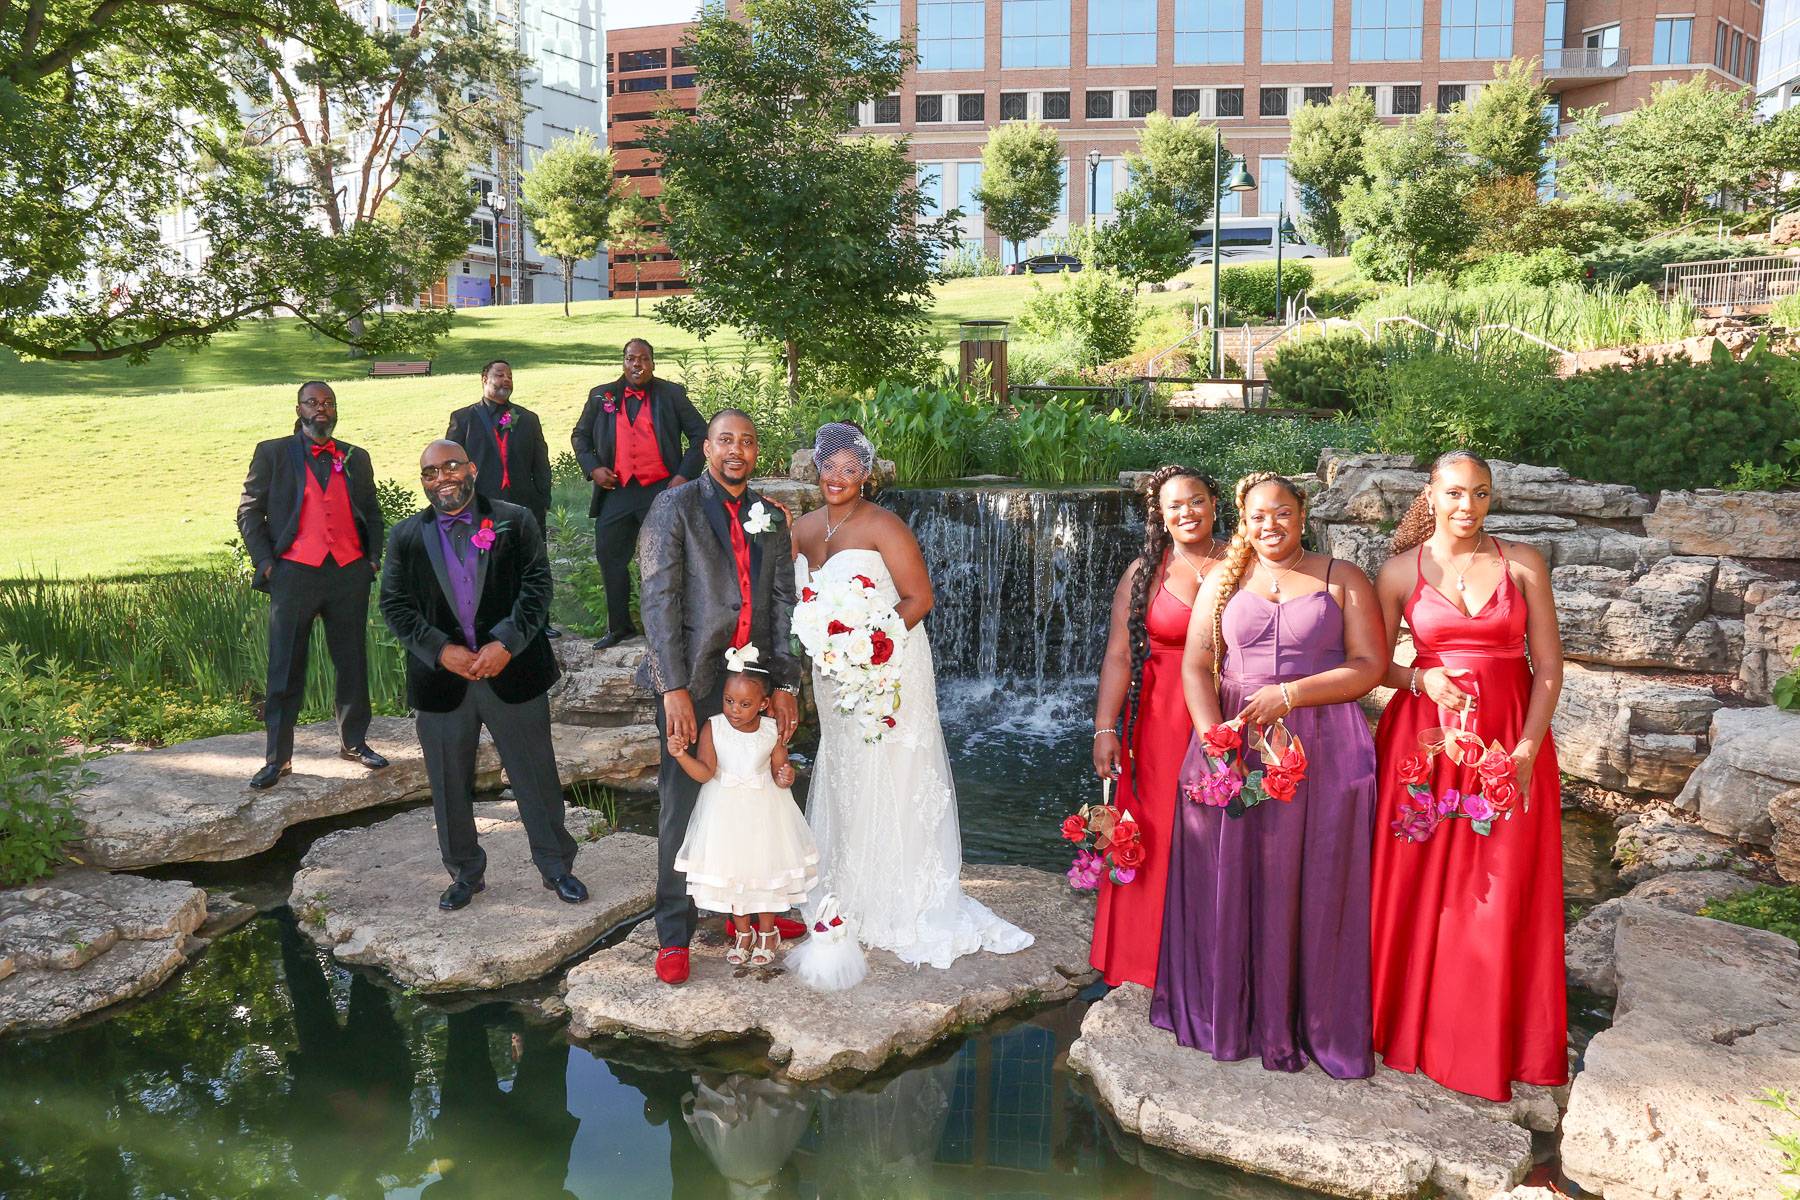 The newlyweds and their attendants grouped around the pond